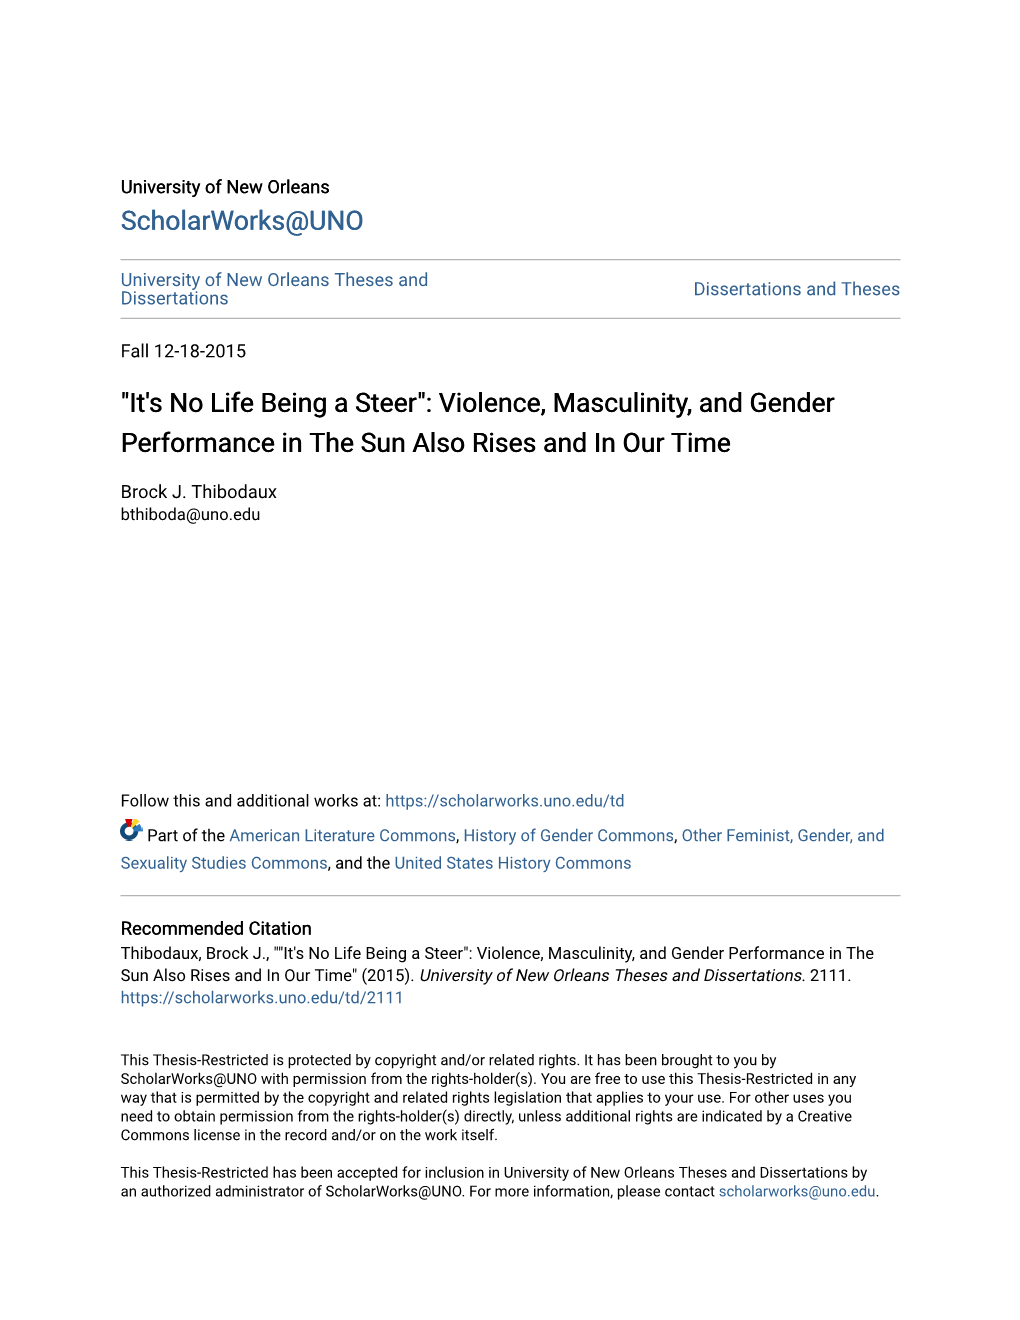 "It's No Life Being a Steer": Violence, Masculinity, and Gender Performance in the Sun Also Rises and in Our Time